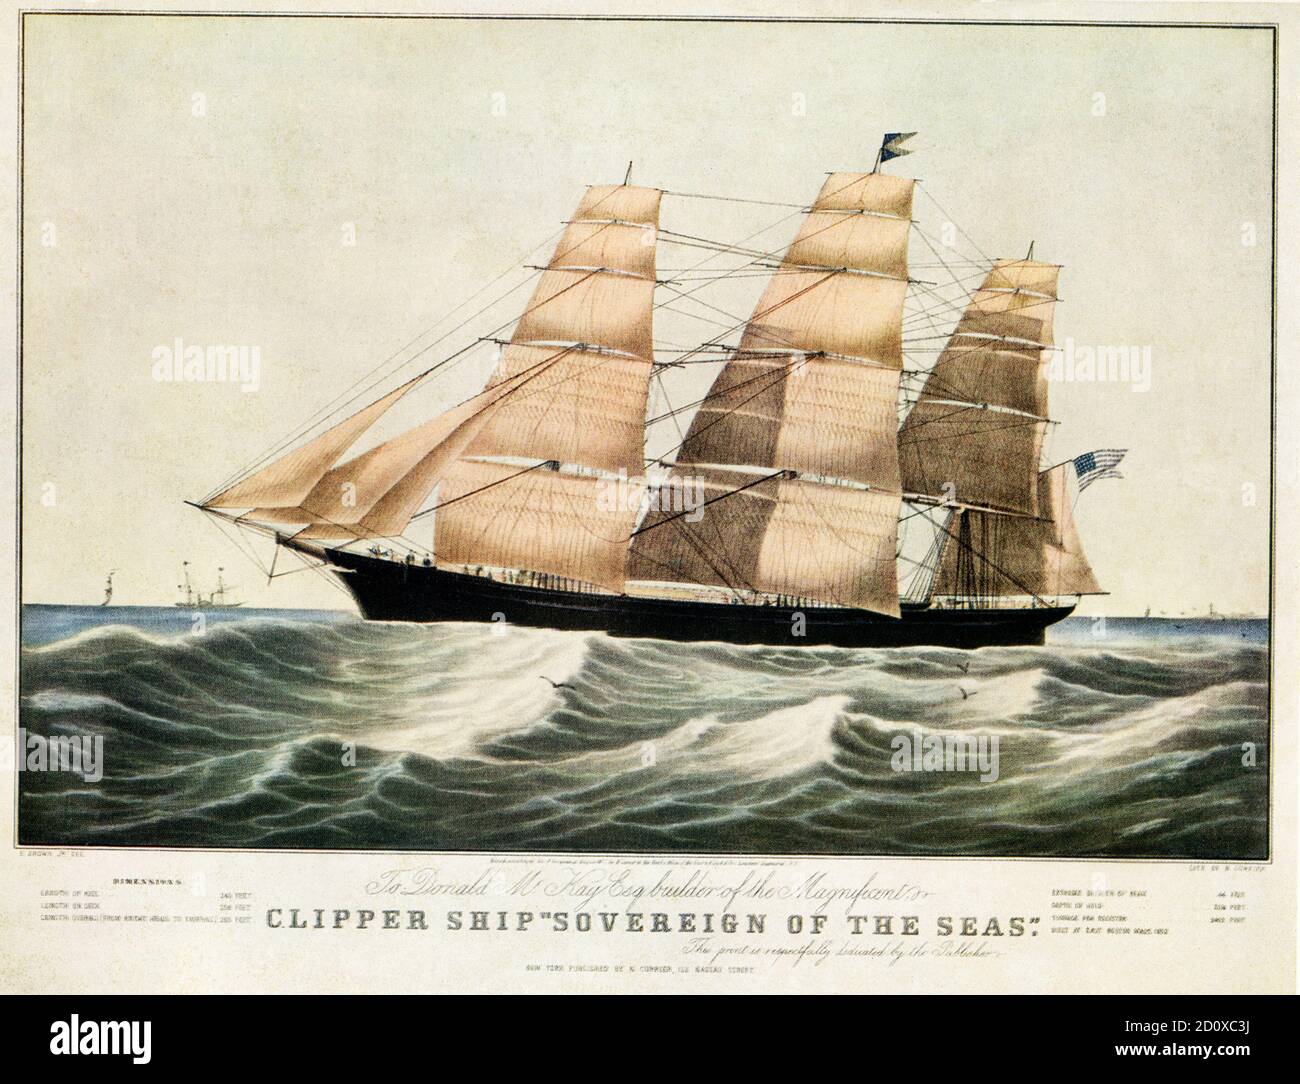 Clipper Ship 'Sovereign of the Seas' E Brown Jr del N Currier 1852.  Sovereign of the Seas, a clipper ship built in 1852, was a sailing vessel notable for setting the world record for fastest sailing ship—22 knots. Stock Photo